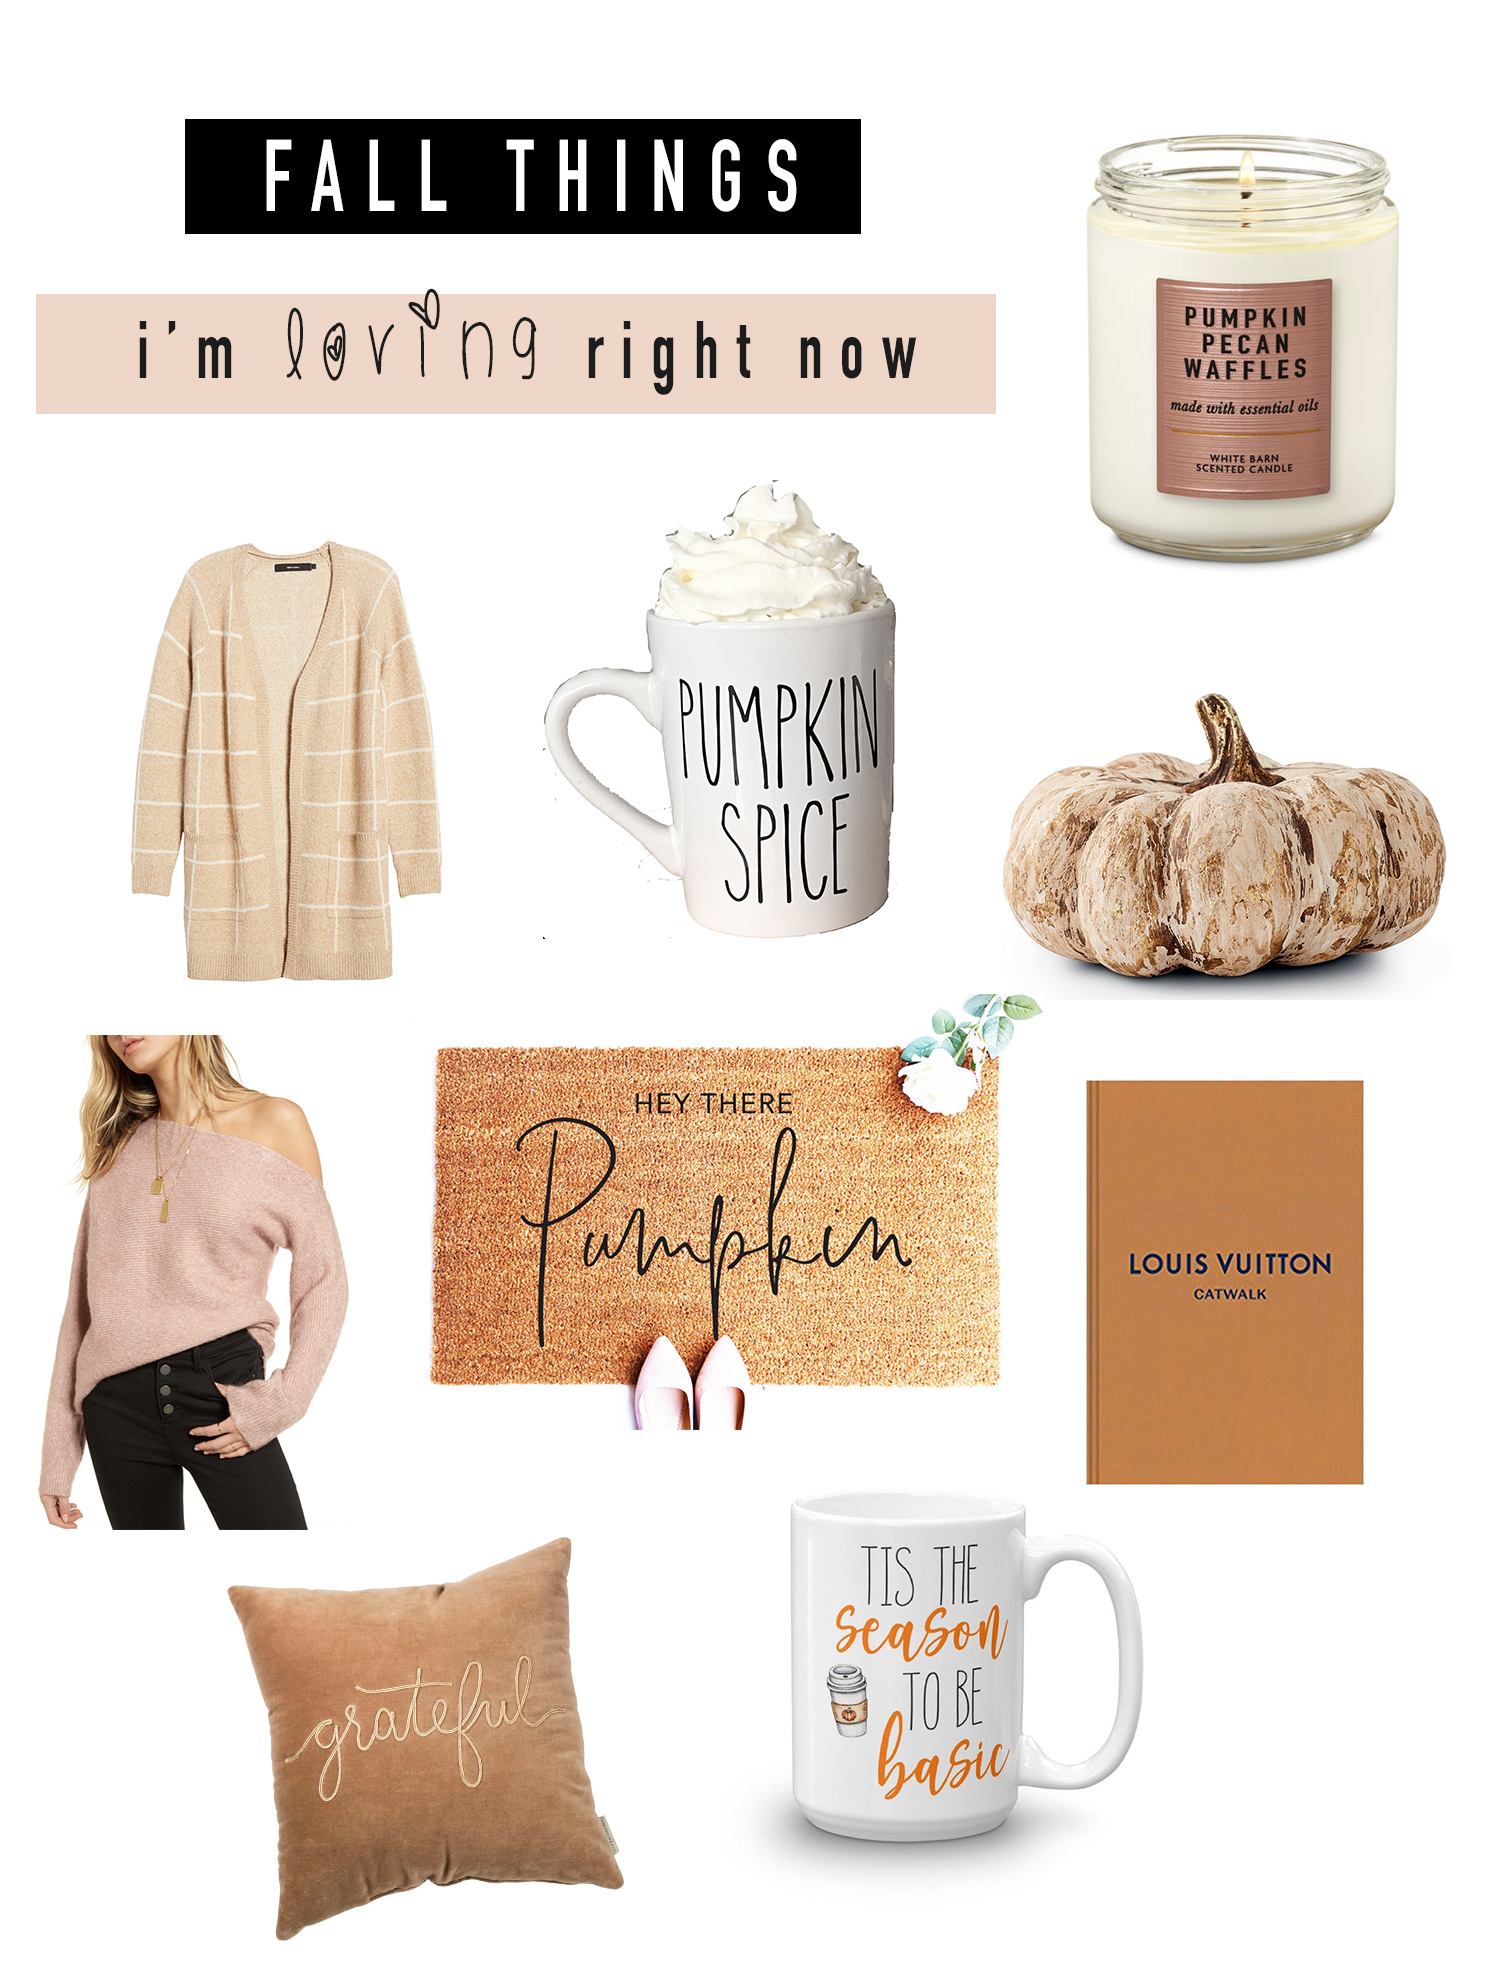 Fall Things I'm Loving Right Now | Pumpkin Spice | Blondie in the City by Hayley Larue